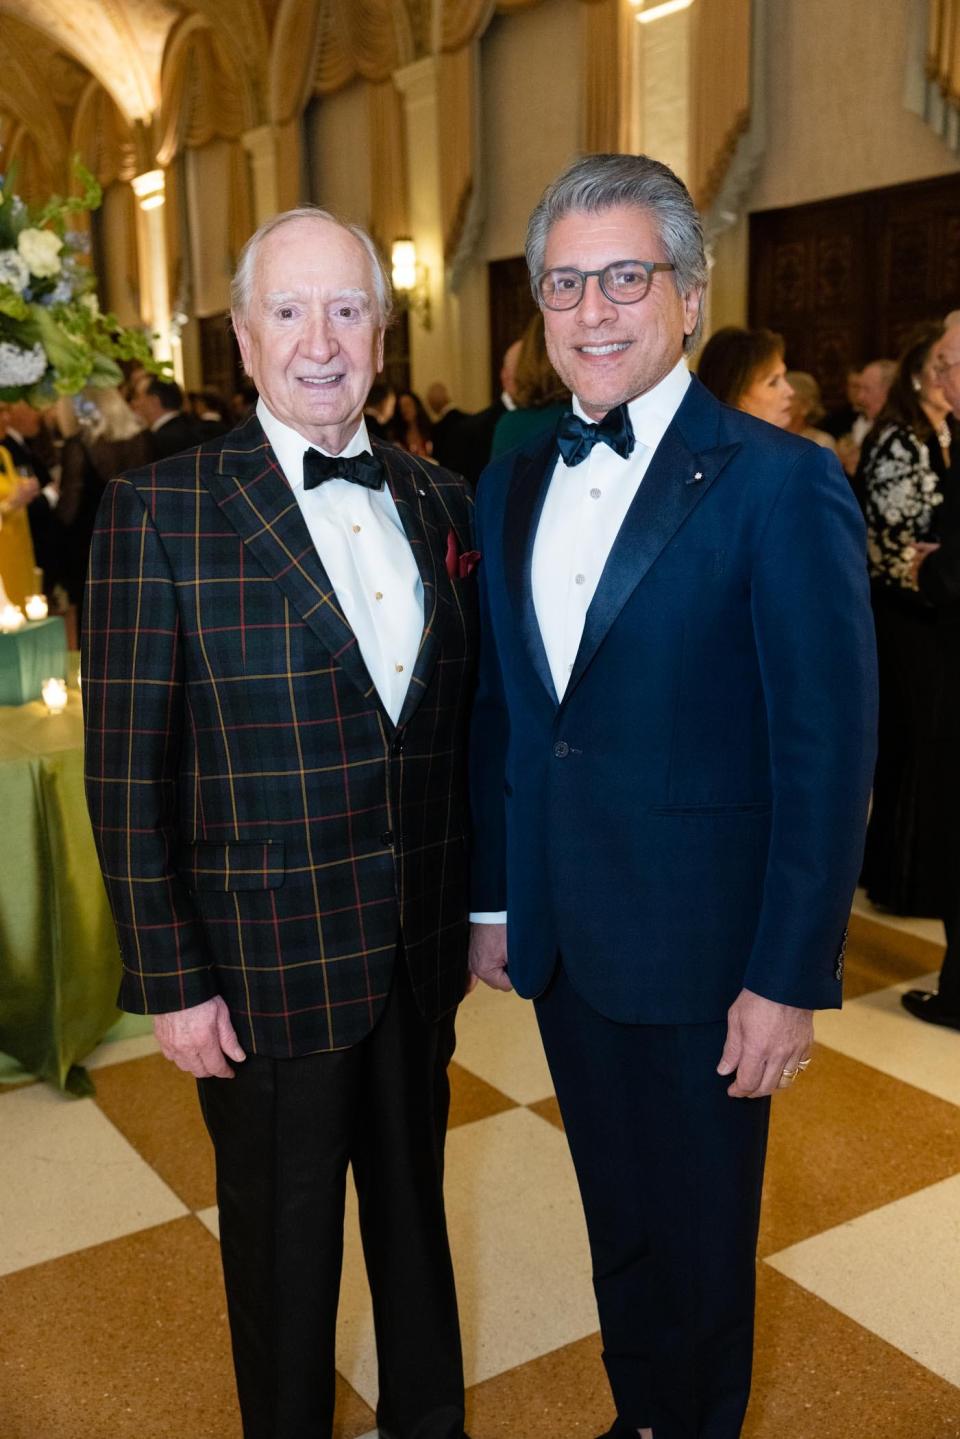 James Borynack and Adolfo Zarulegui at The Ireland Fund Emerald Isle Ball at The Breakers on Feb. 16, 2023. This year's ball is set for Feb. 15, also at The Breakers.